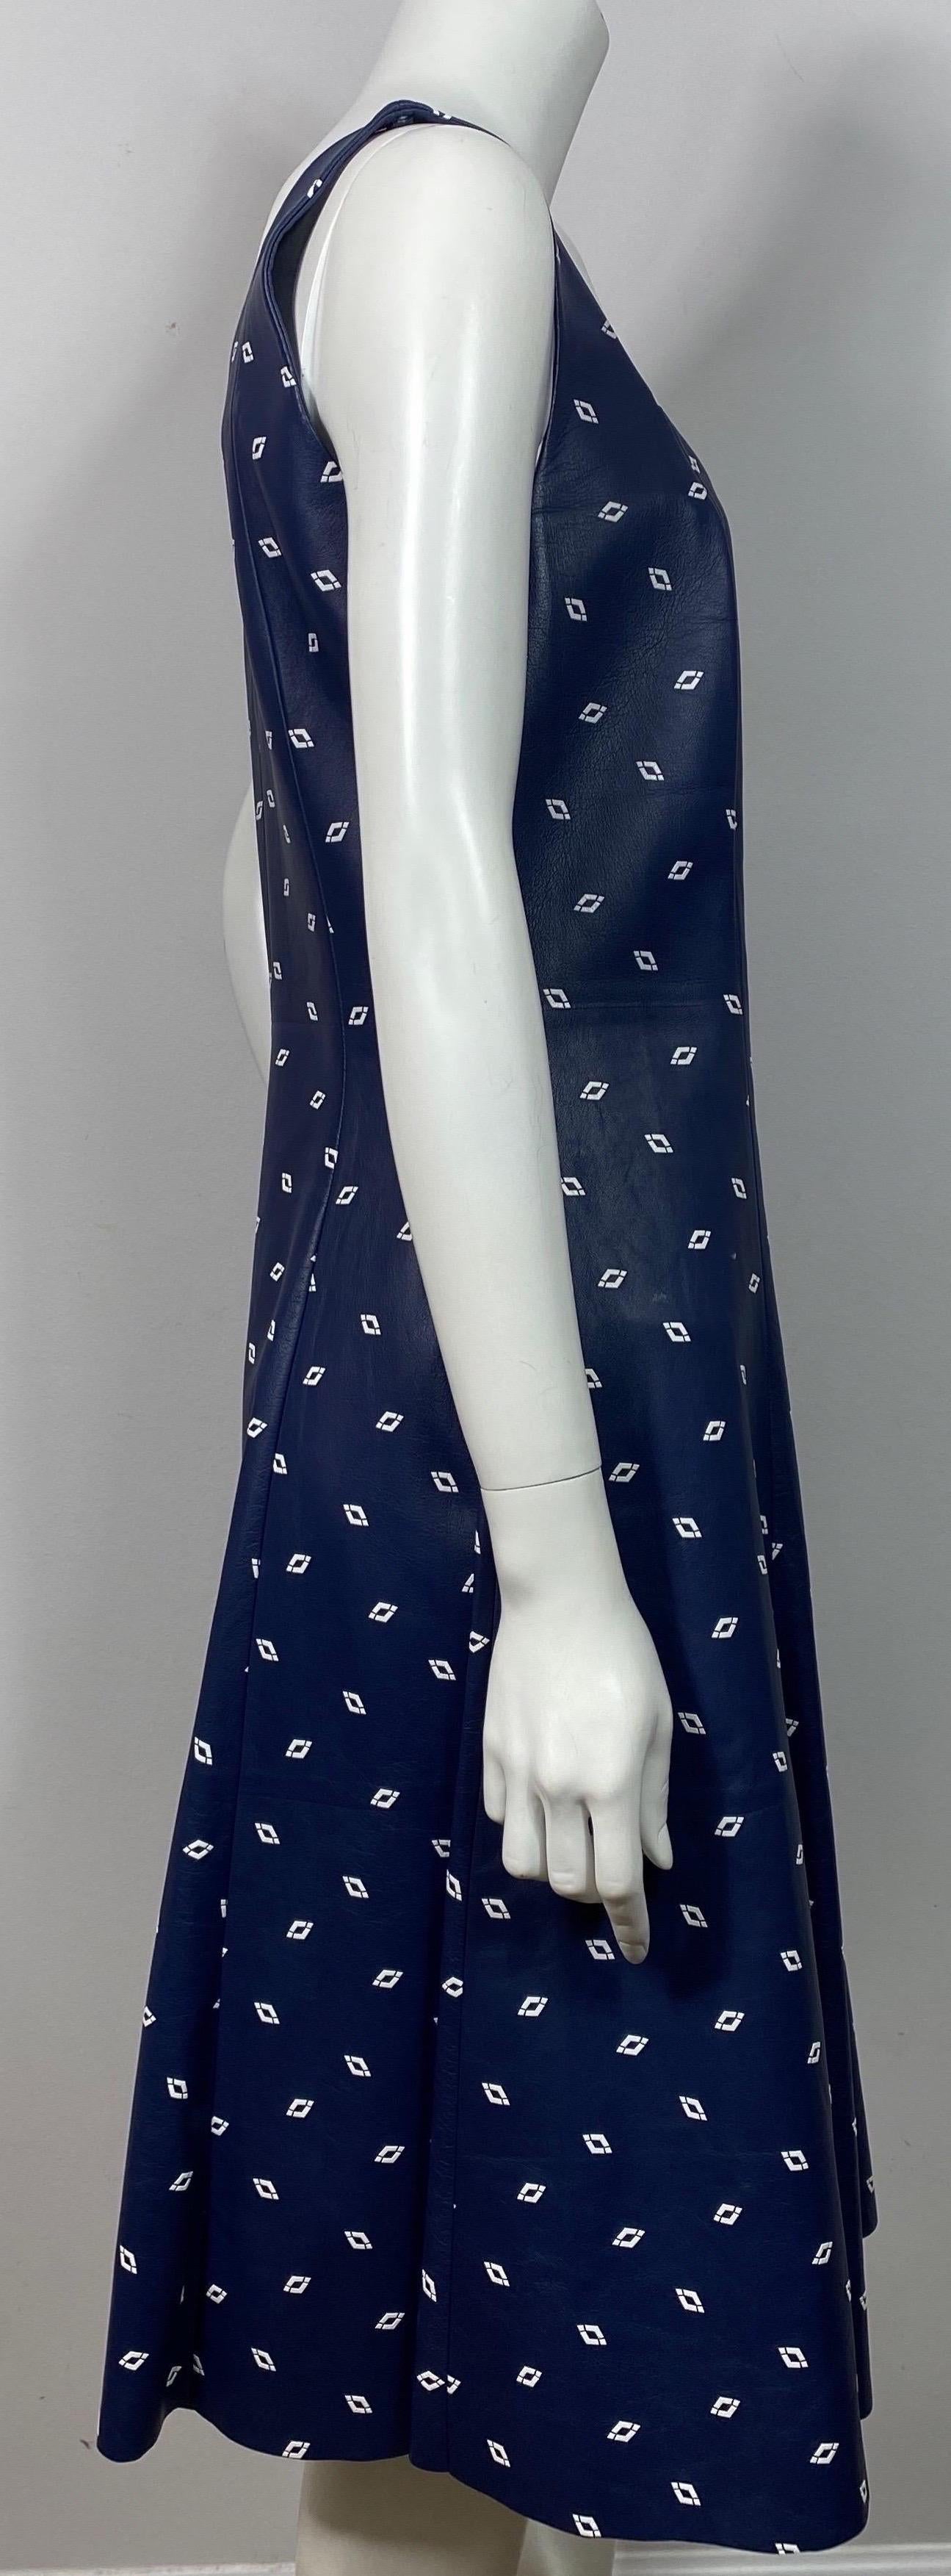 Ralph Lauren Purple Label Navy and White Leather Dress - Size 10 For Sale 3